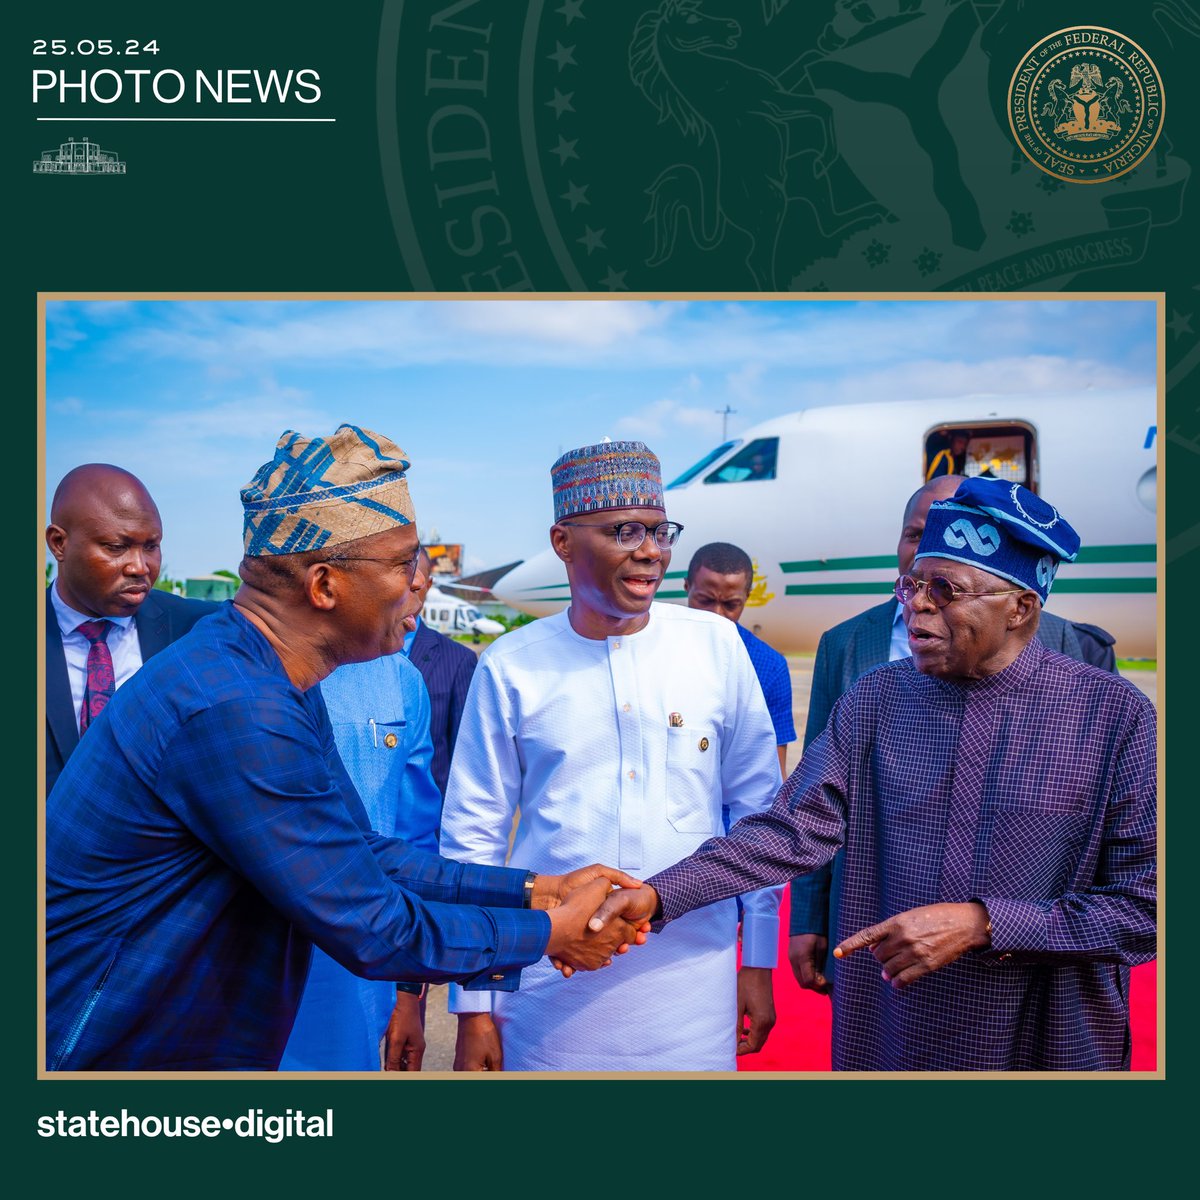 President Tinubu Arrives in Lagos for the Commissioning of New Apapa, Tincan Island roads